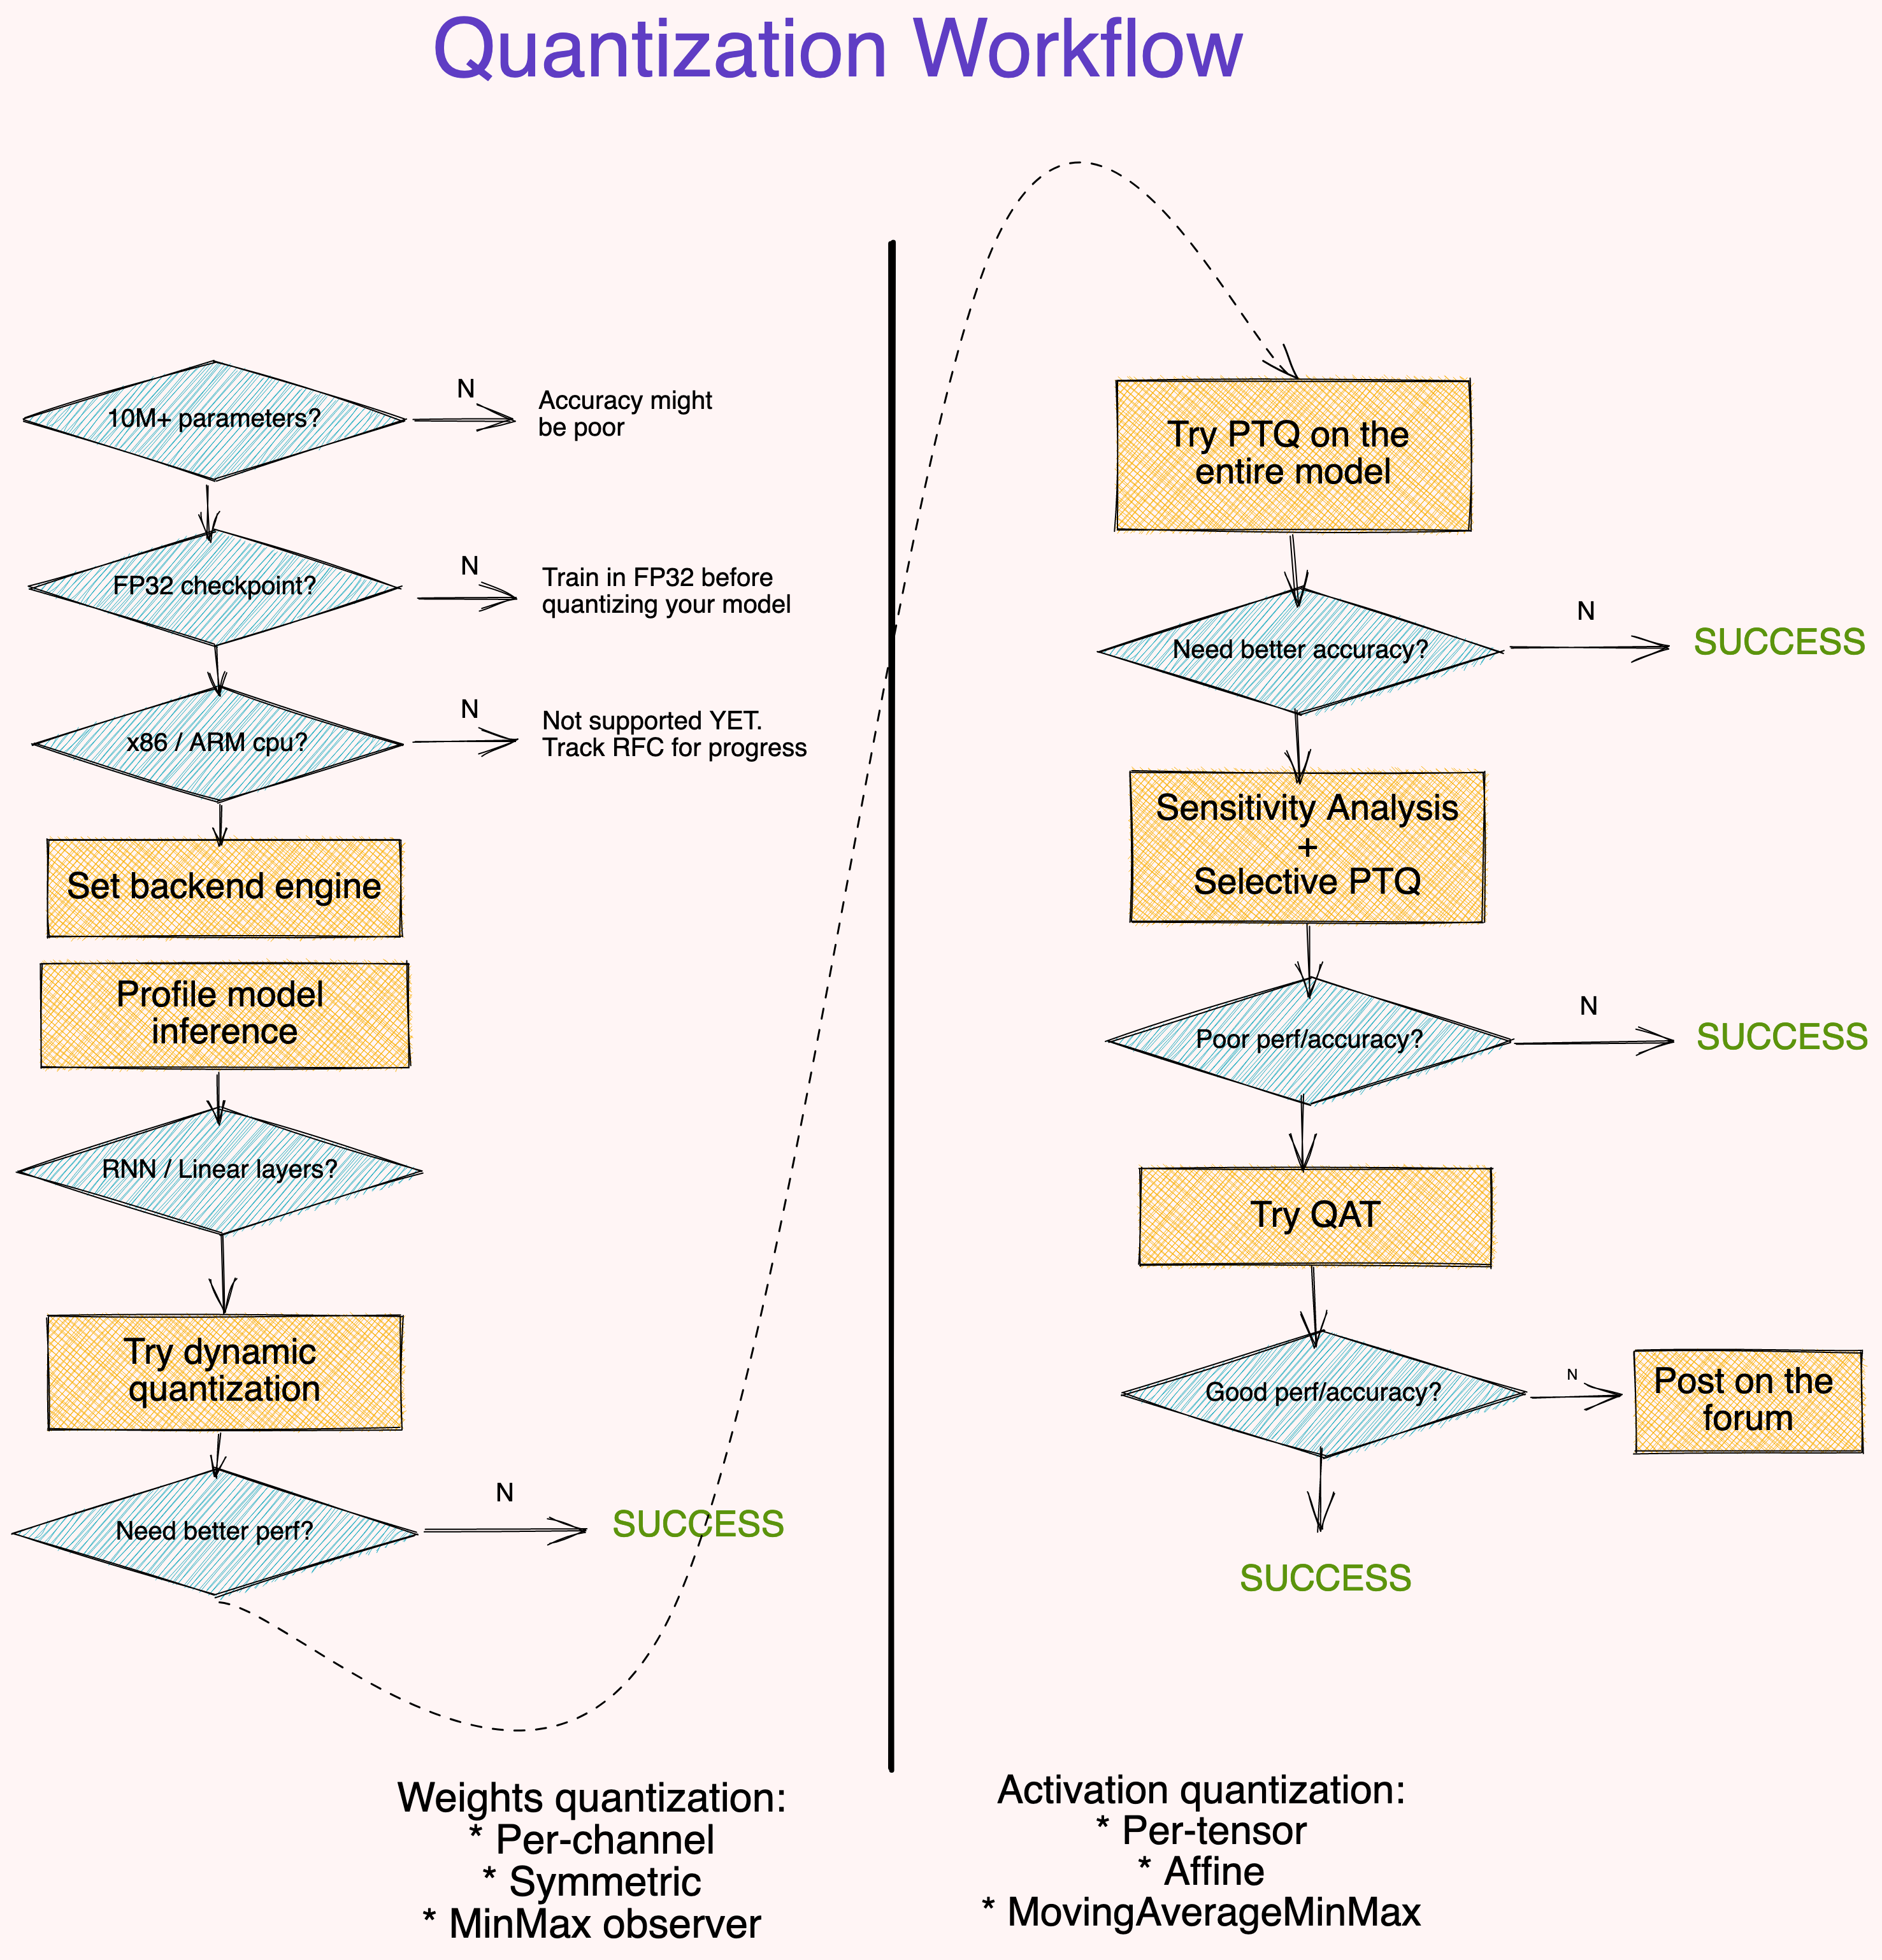 Suggested quantization workflow